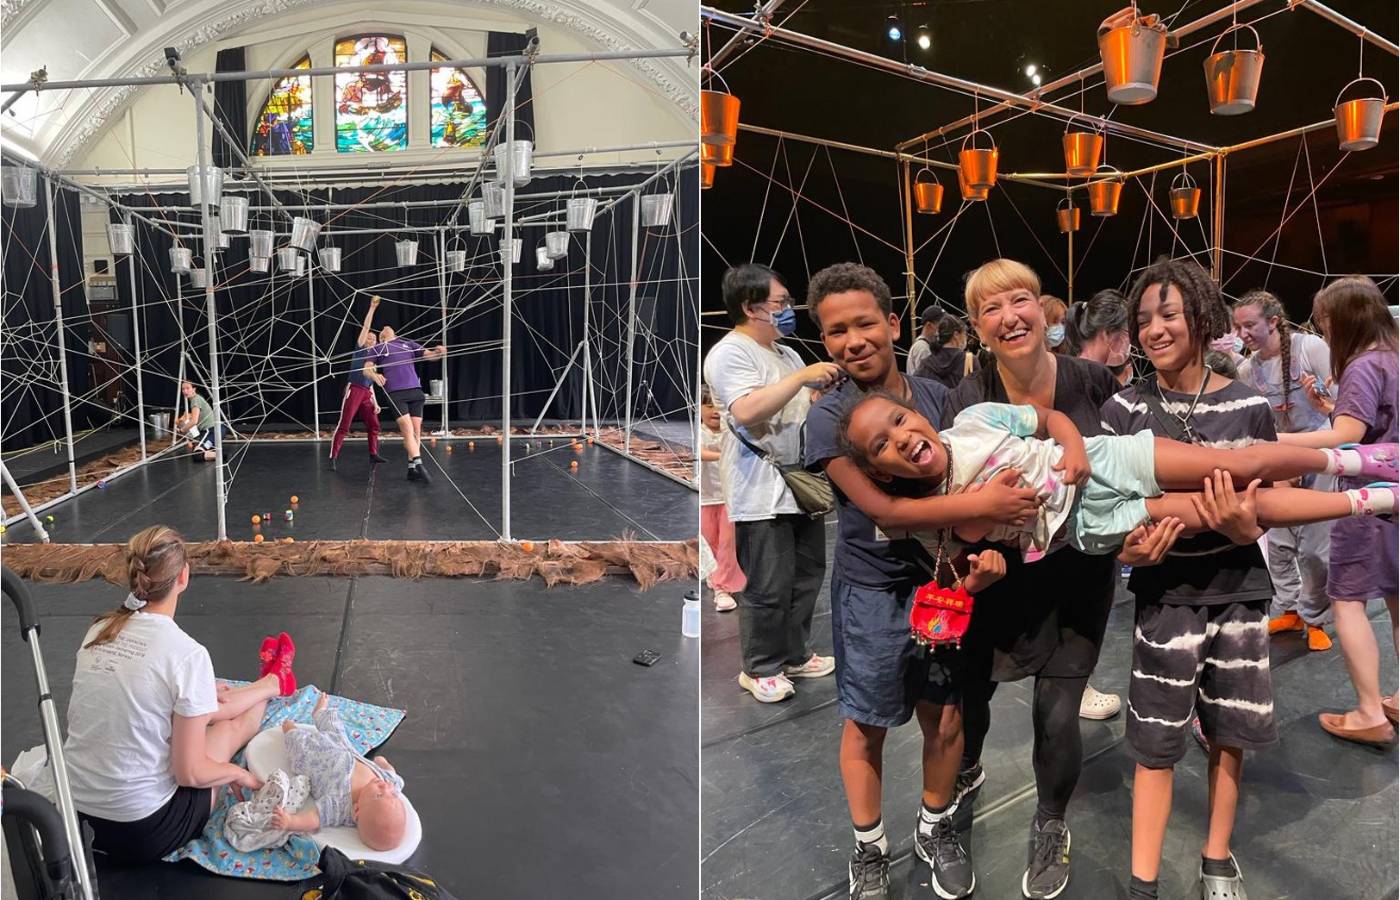 Image on left shows a woman sitting on the floor with a baby at a dance rehearsale, image on the right shows a woman and children holding up another child in the air